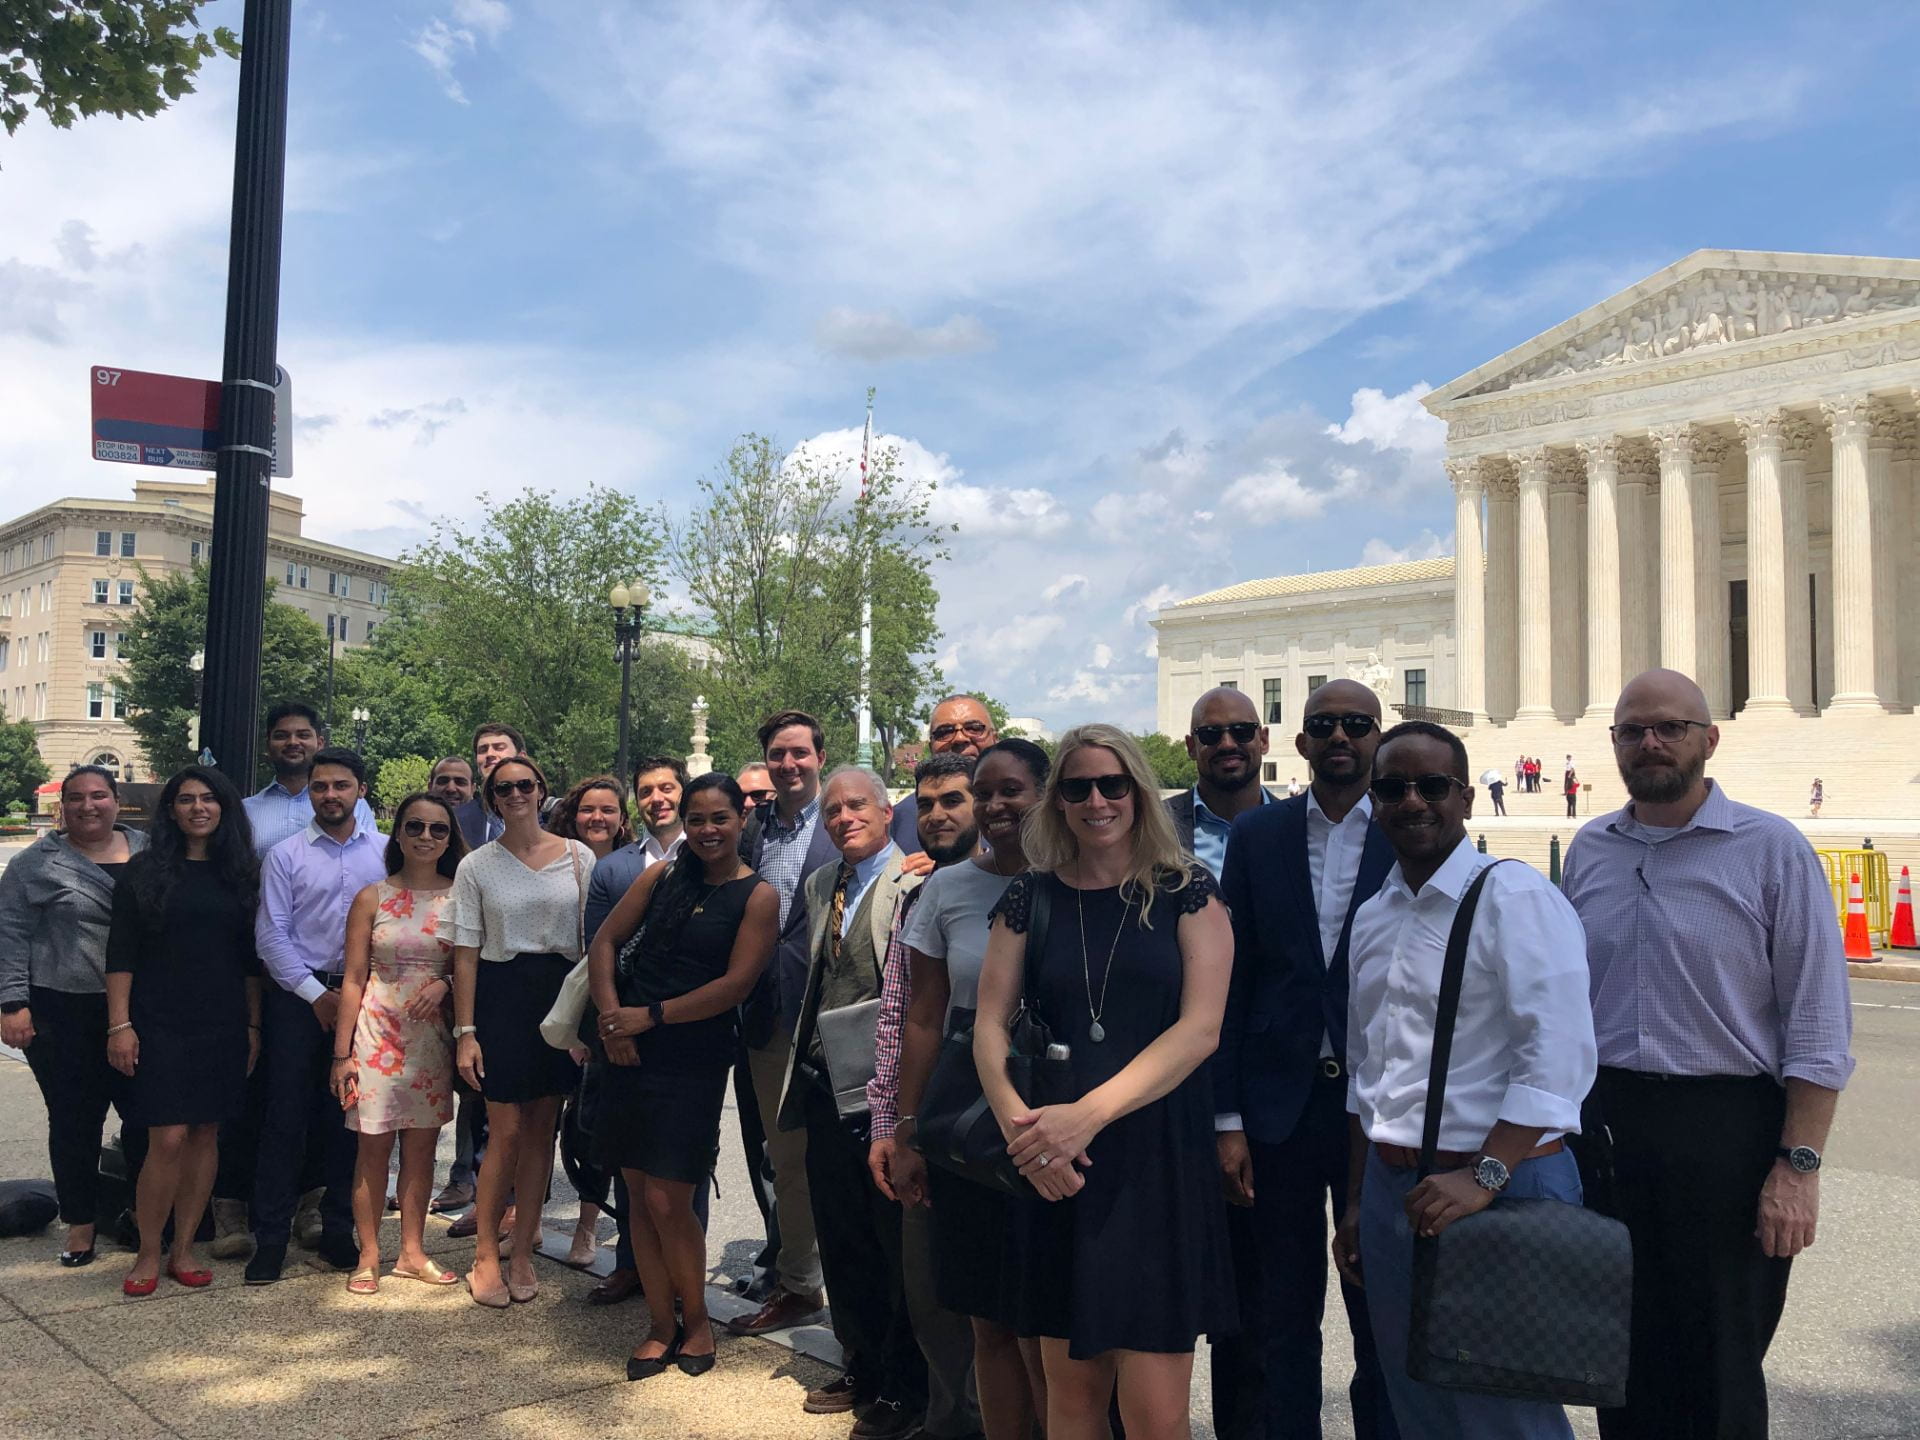 Group photo of students in front of the Supreme Court